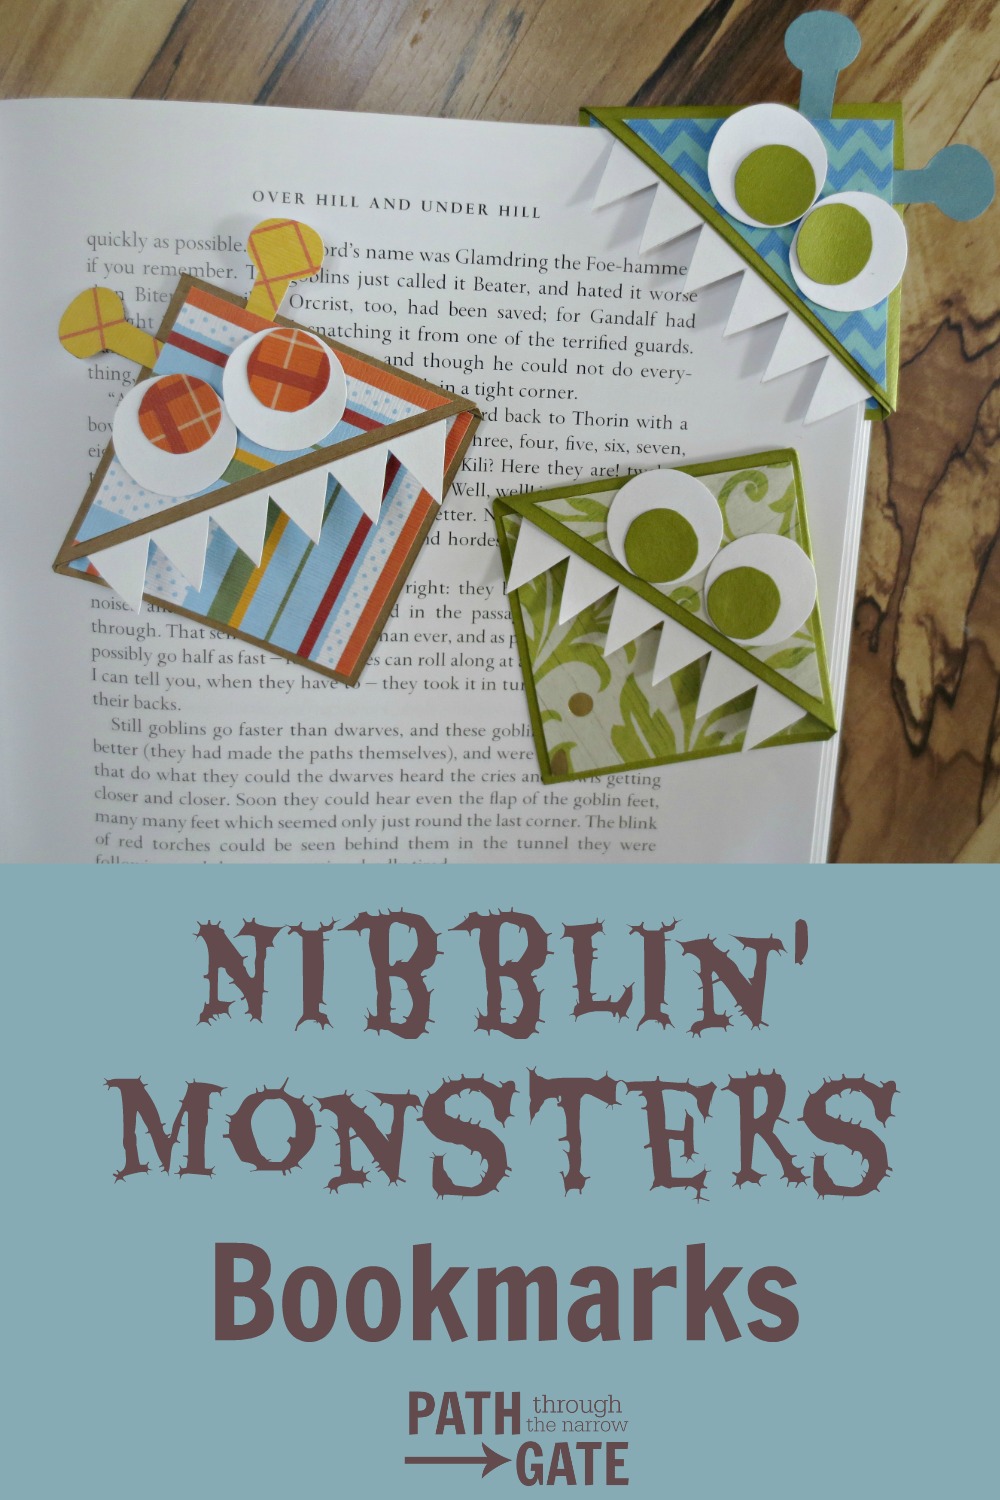 Do you have a hard time finding your place in your book? Are you always short on good bookmarks? These adorable Nibblin' Monsters Bookmarks are fun to make and fun to use! Try them today!